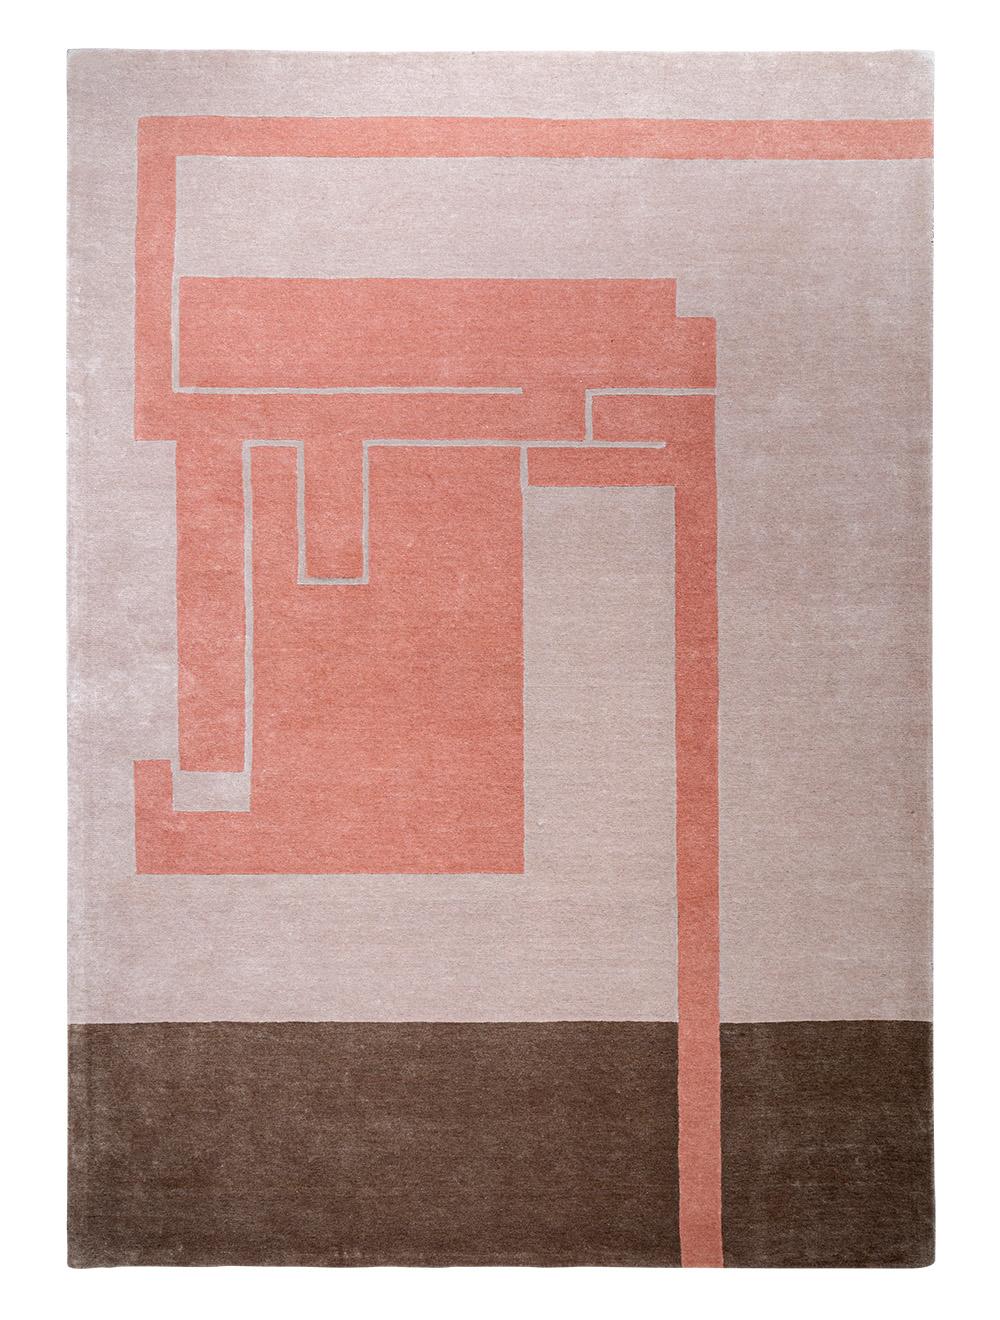 Fragment 3 structures carpet by Massimo Copenhagen
Designed by OEO Studio
Handtufted
Materials: 50% New Zealand Wool – 50% Bamboo
Dimensions: W 300 x H 400 cm.
Available colors: Fragment 1, Fragment 2, Fragment 2 with Border, Fragment 3, and